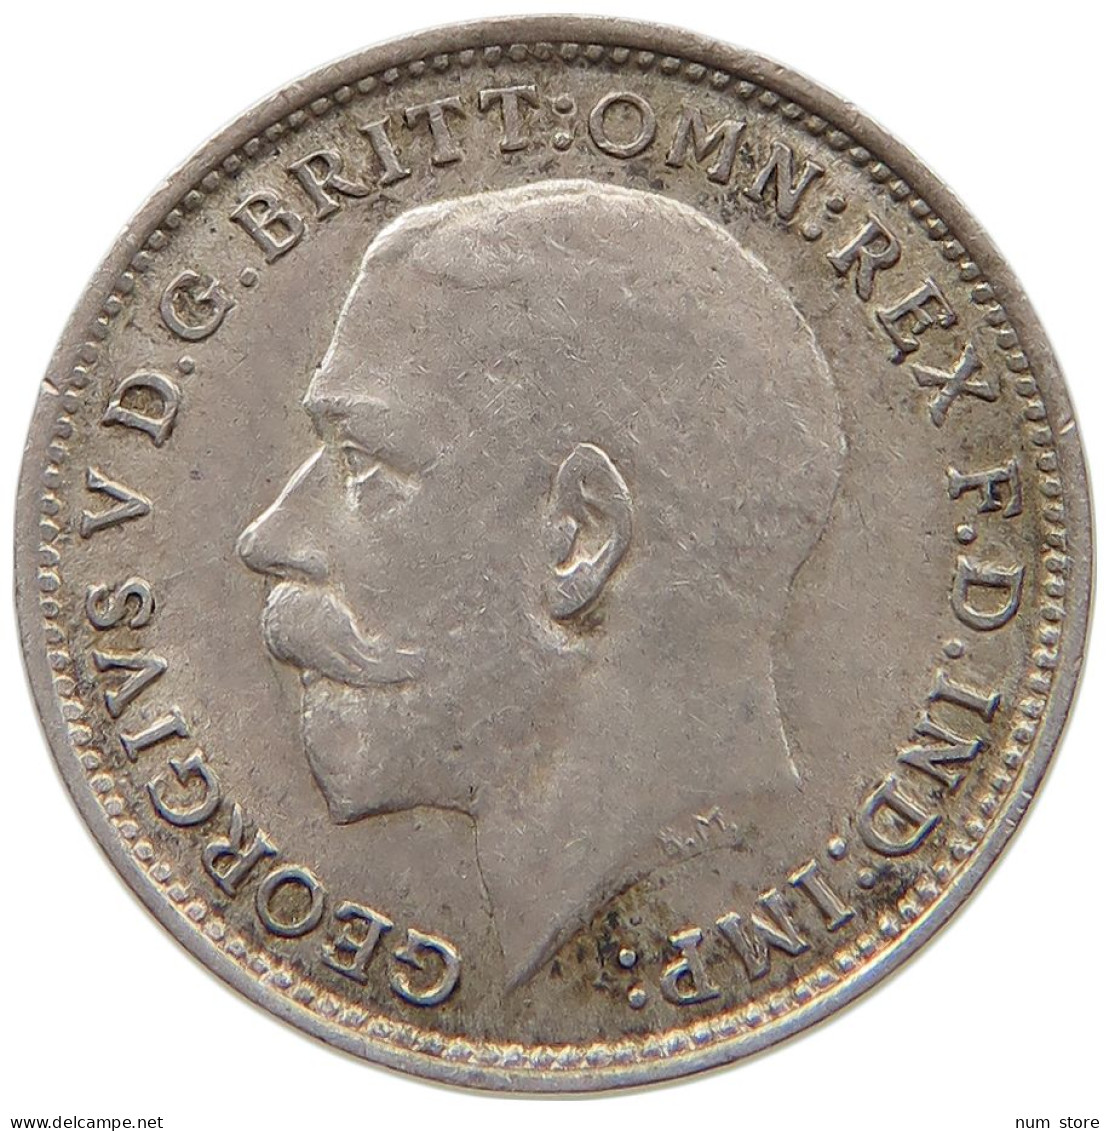 GREAT BRITAIN THREEPENCE 1915 George V. (1910-1936) #t158 0429 - F. 3 Pence